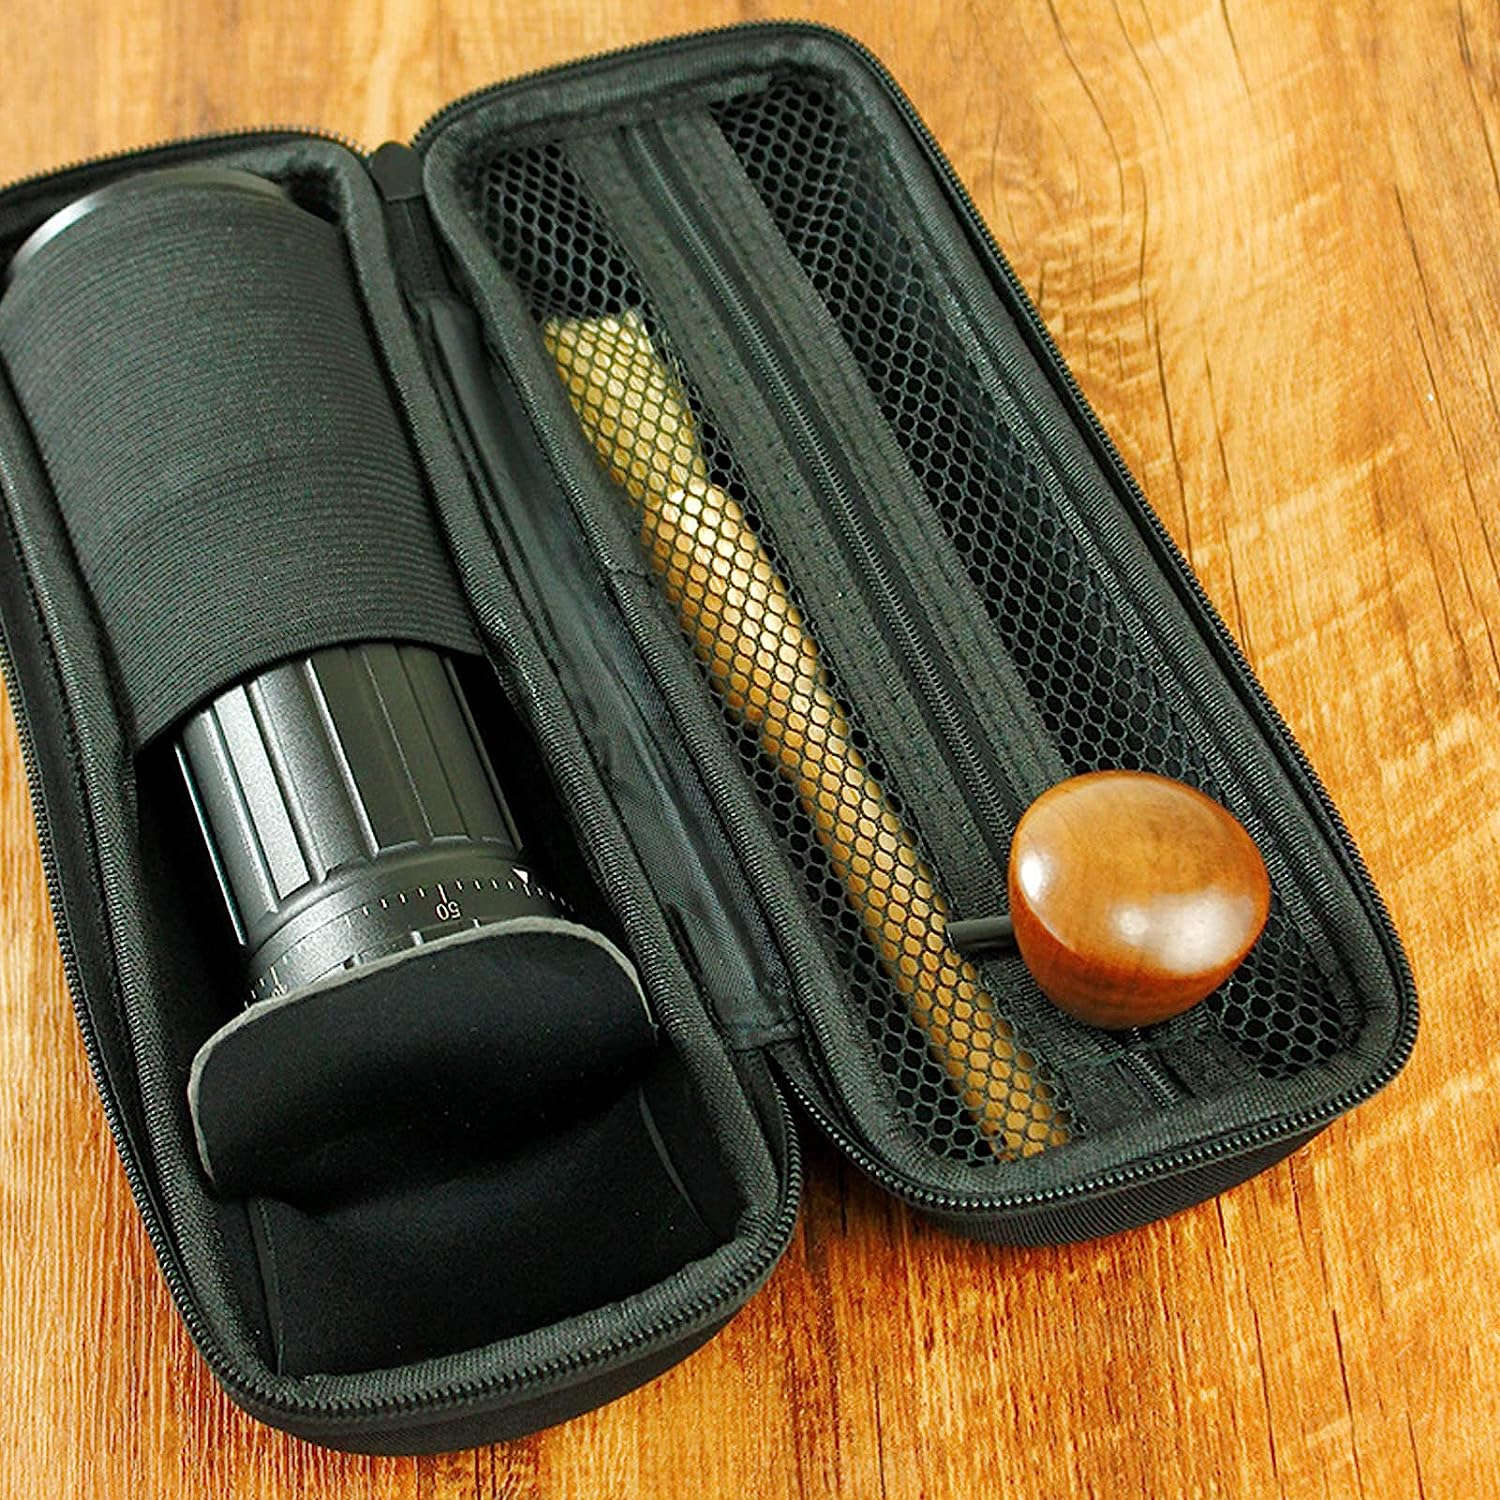 Manual Coffee Grinder Bag, Waterproof, Portable, Durable, Storage Case for Coffee Grinders, Made of Non-Woven Fabric, for Outdoor Travel